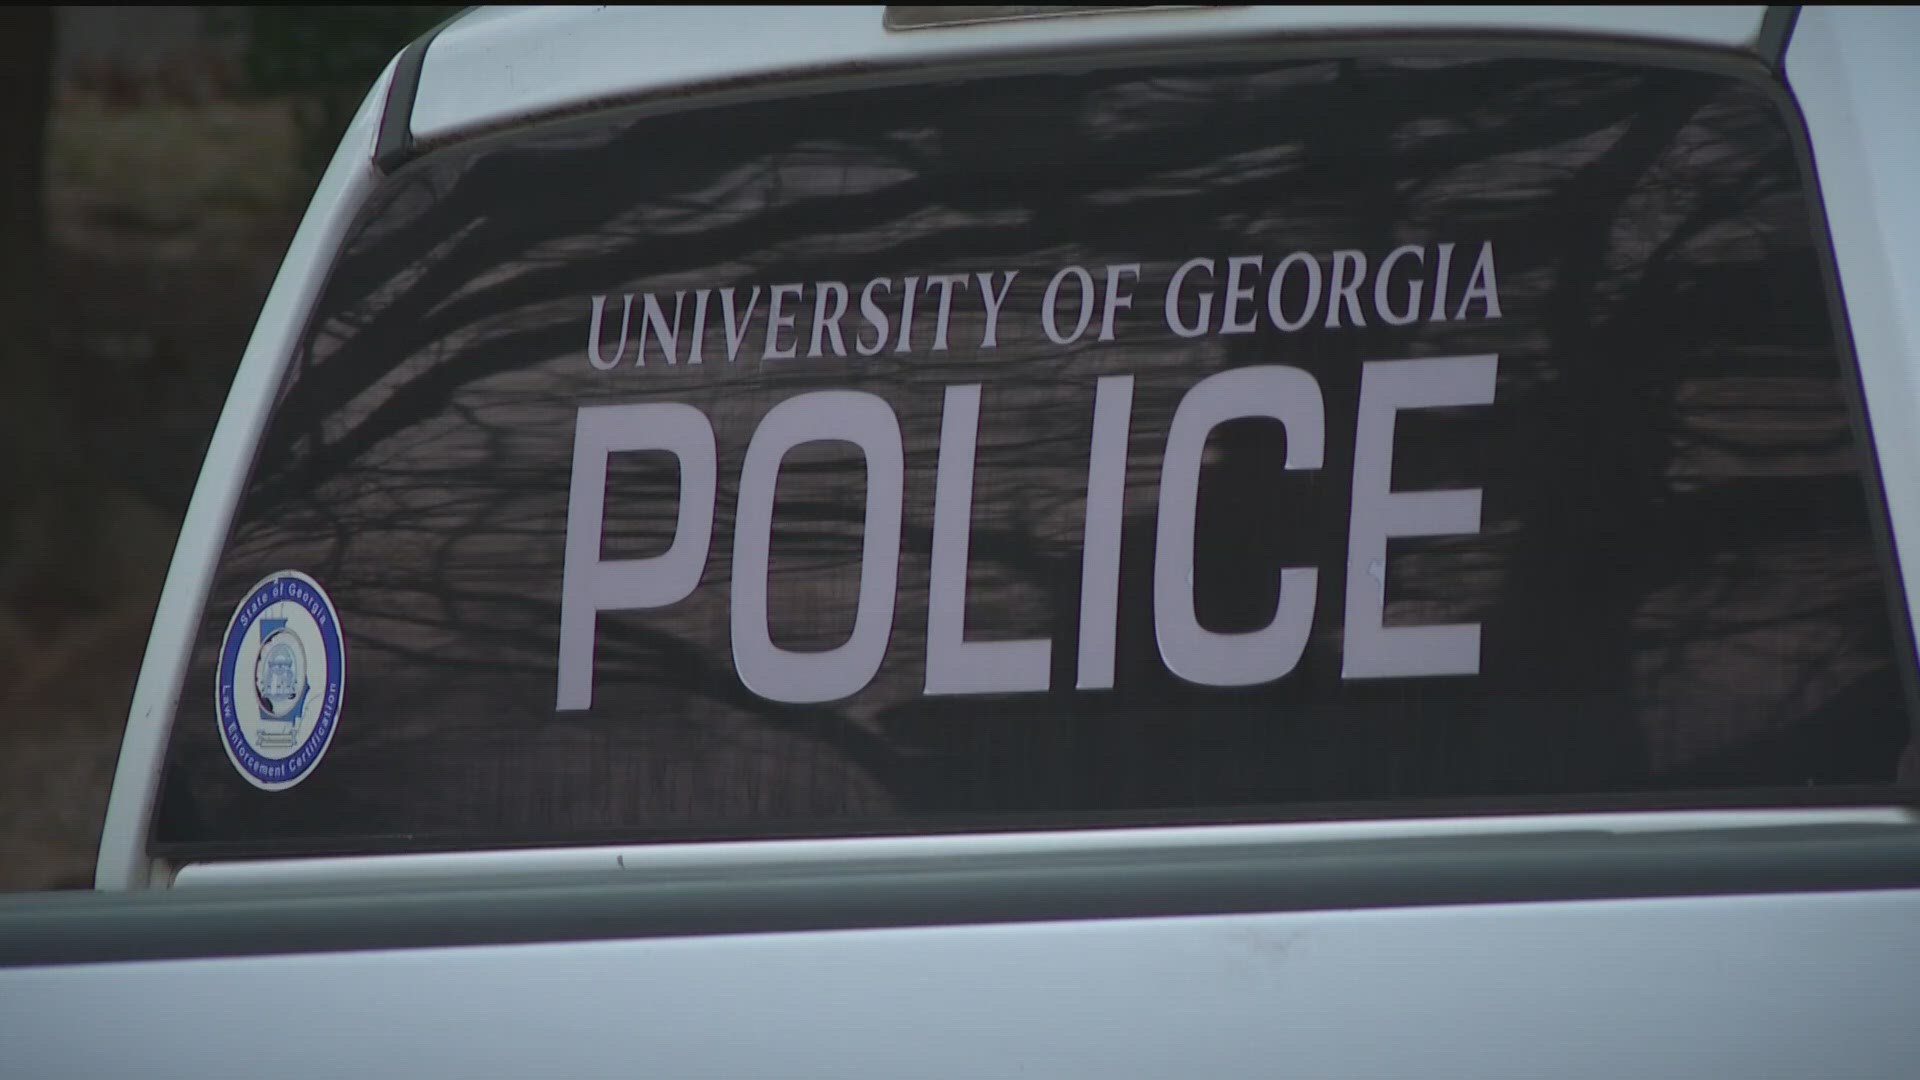 In a Thursday night update, UGA Police Chief Jeff Clark said they do not have a suspect involved at this time.